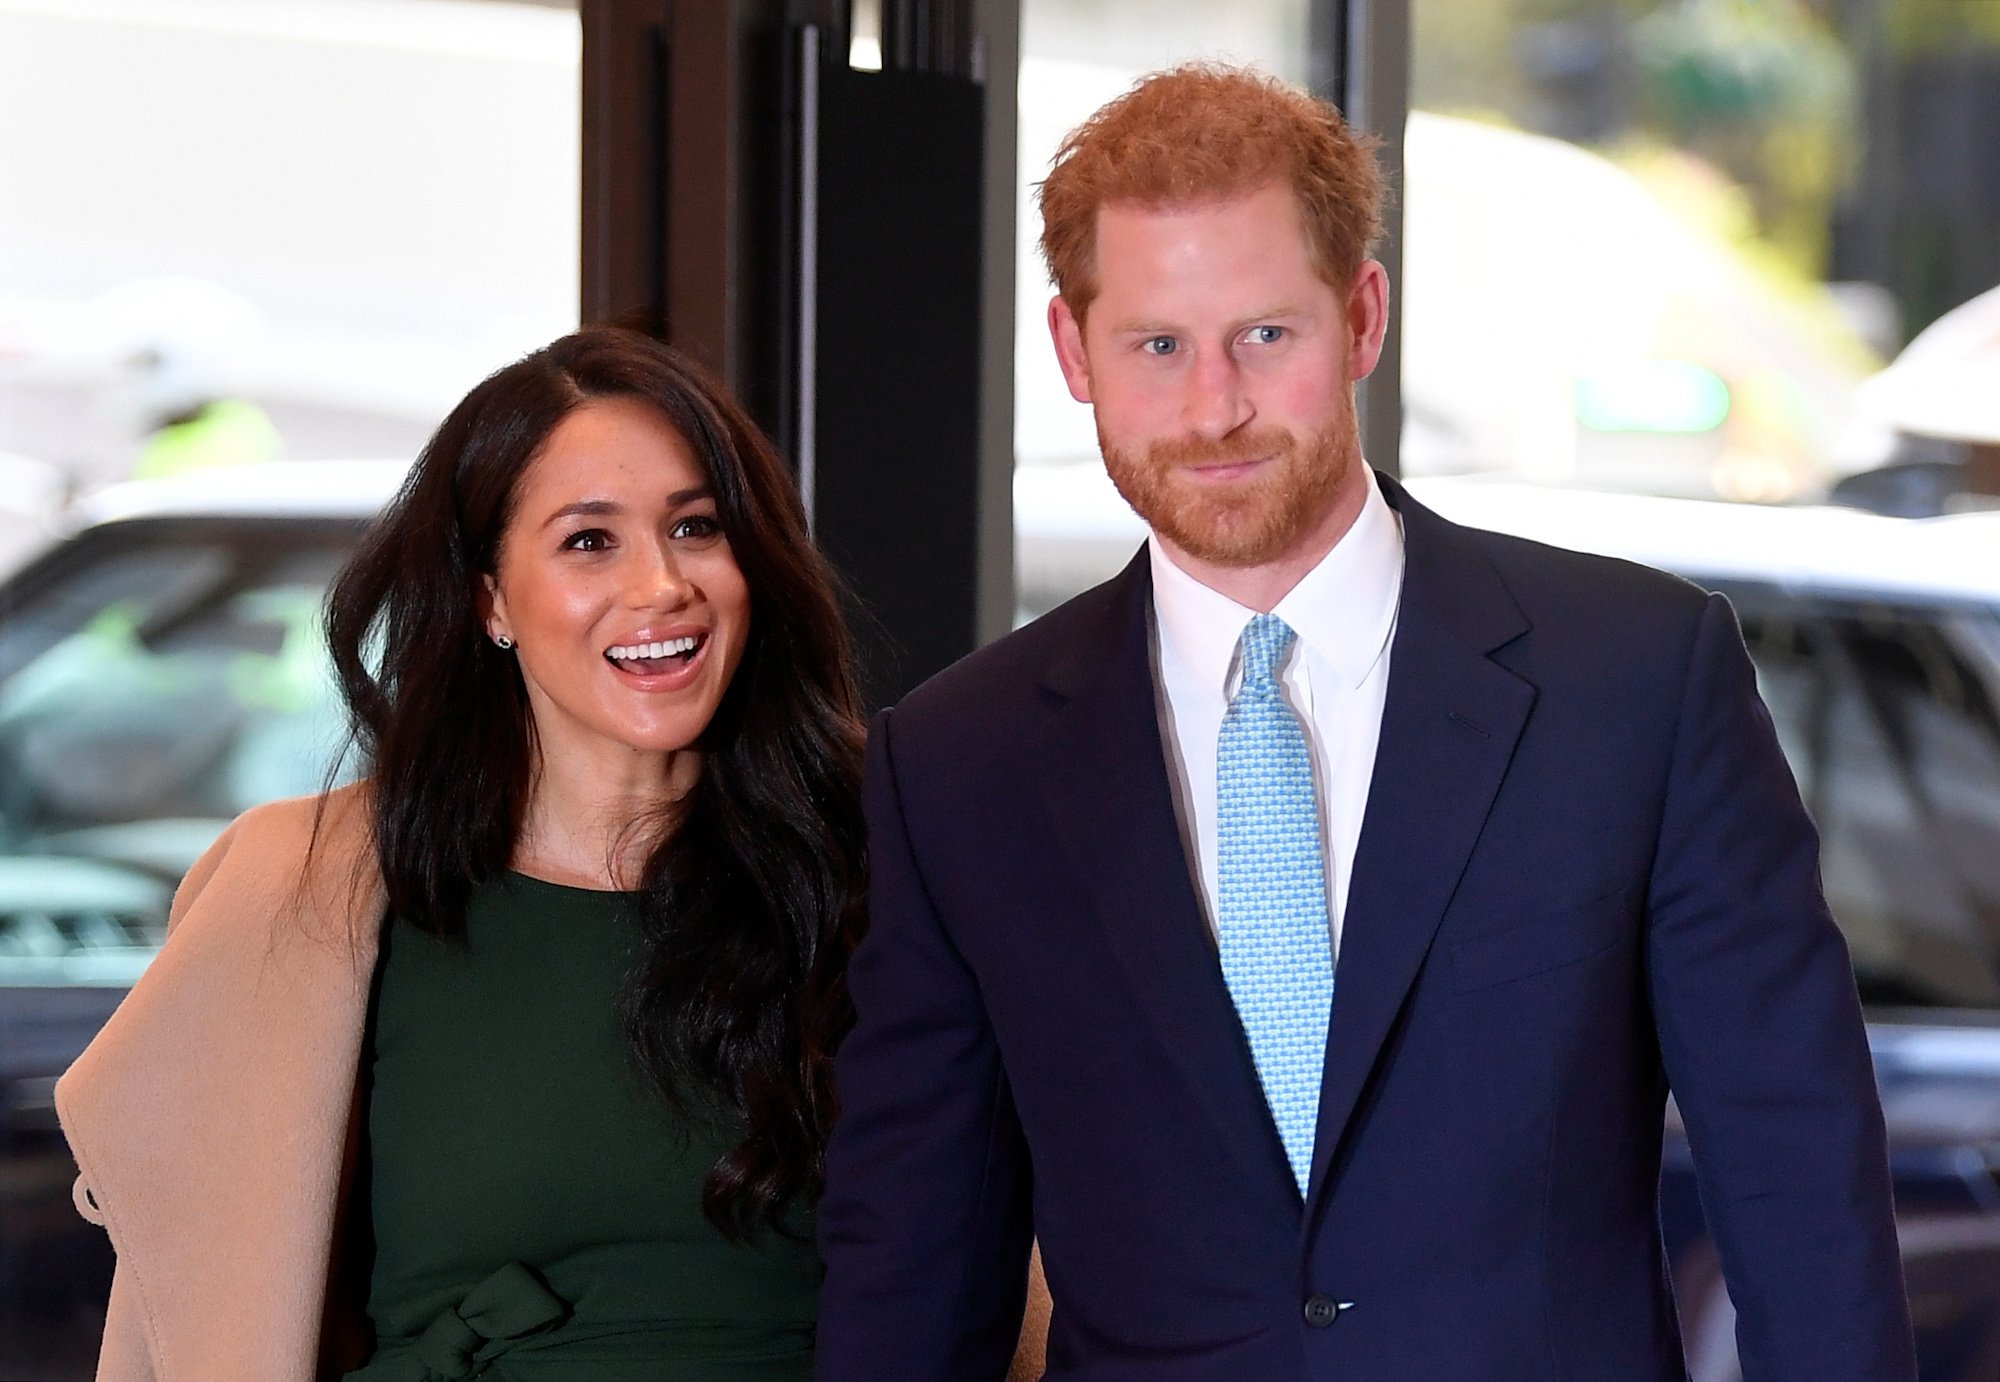 Meghan Markle and Prince Harry attending the WellChild awards at Royal Lancaster Hotel on October 15, 2019